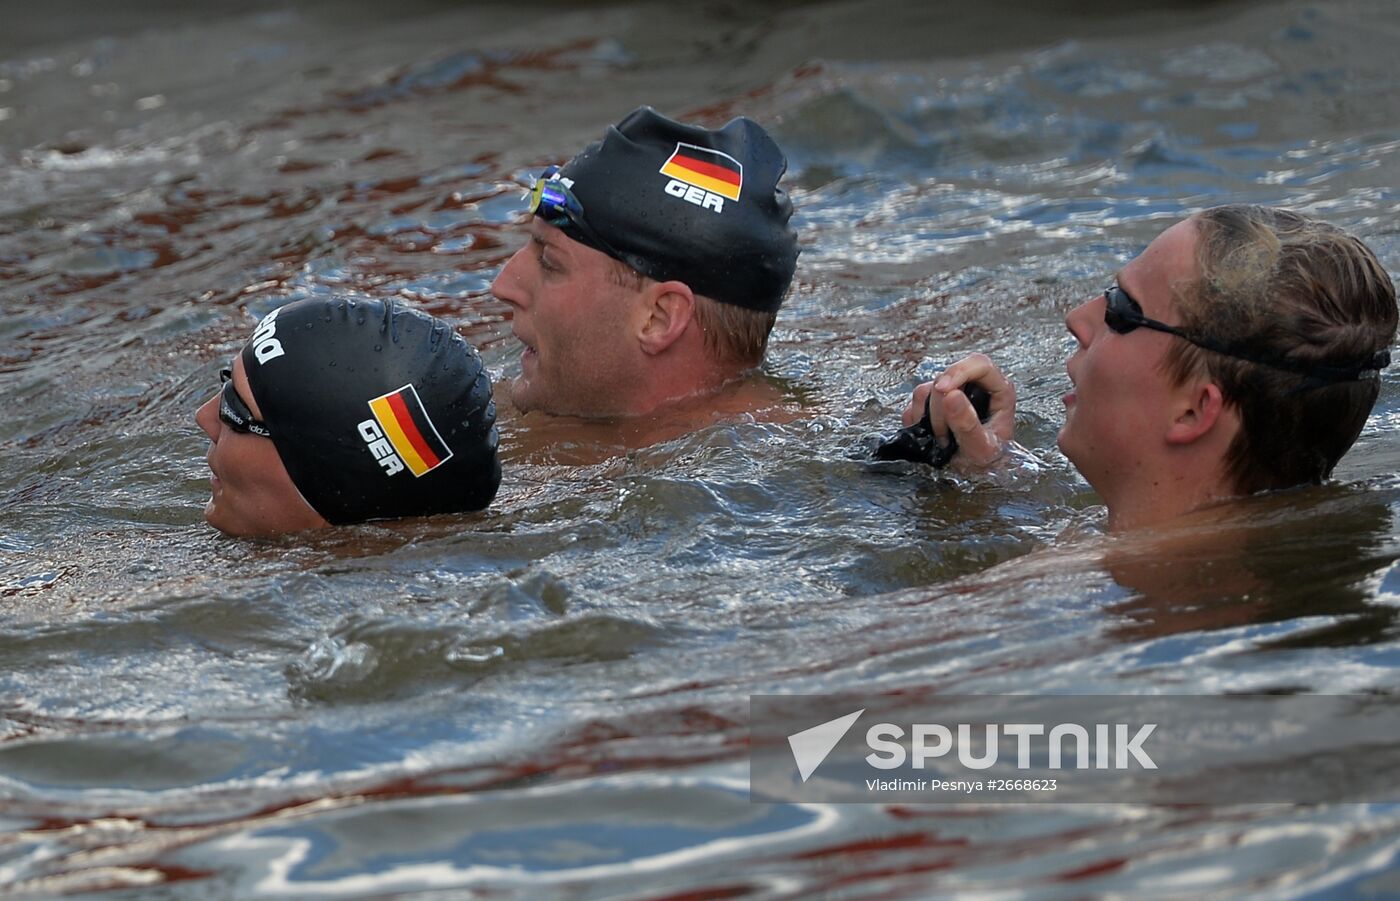 2015 FINA World Championships. Open water swimming. Teams